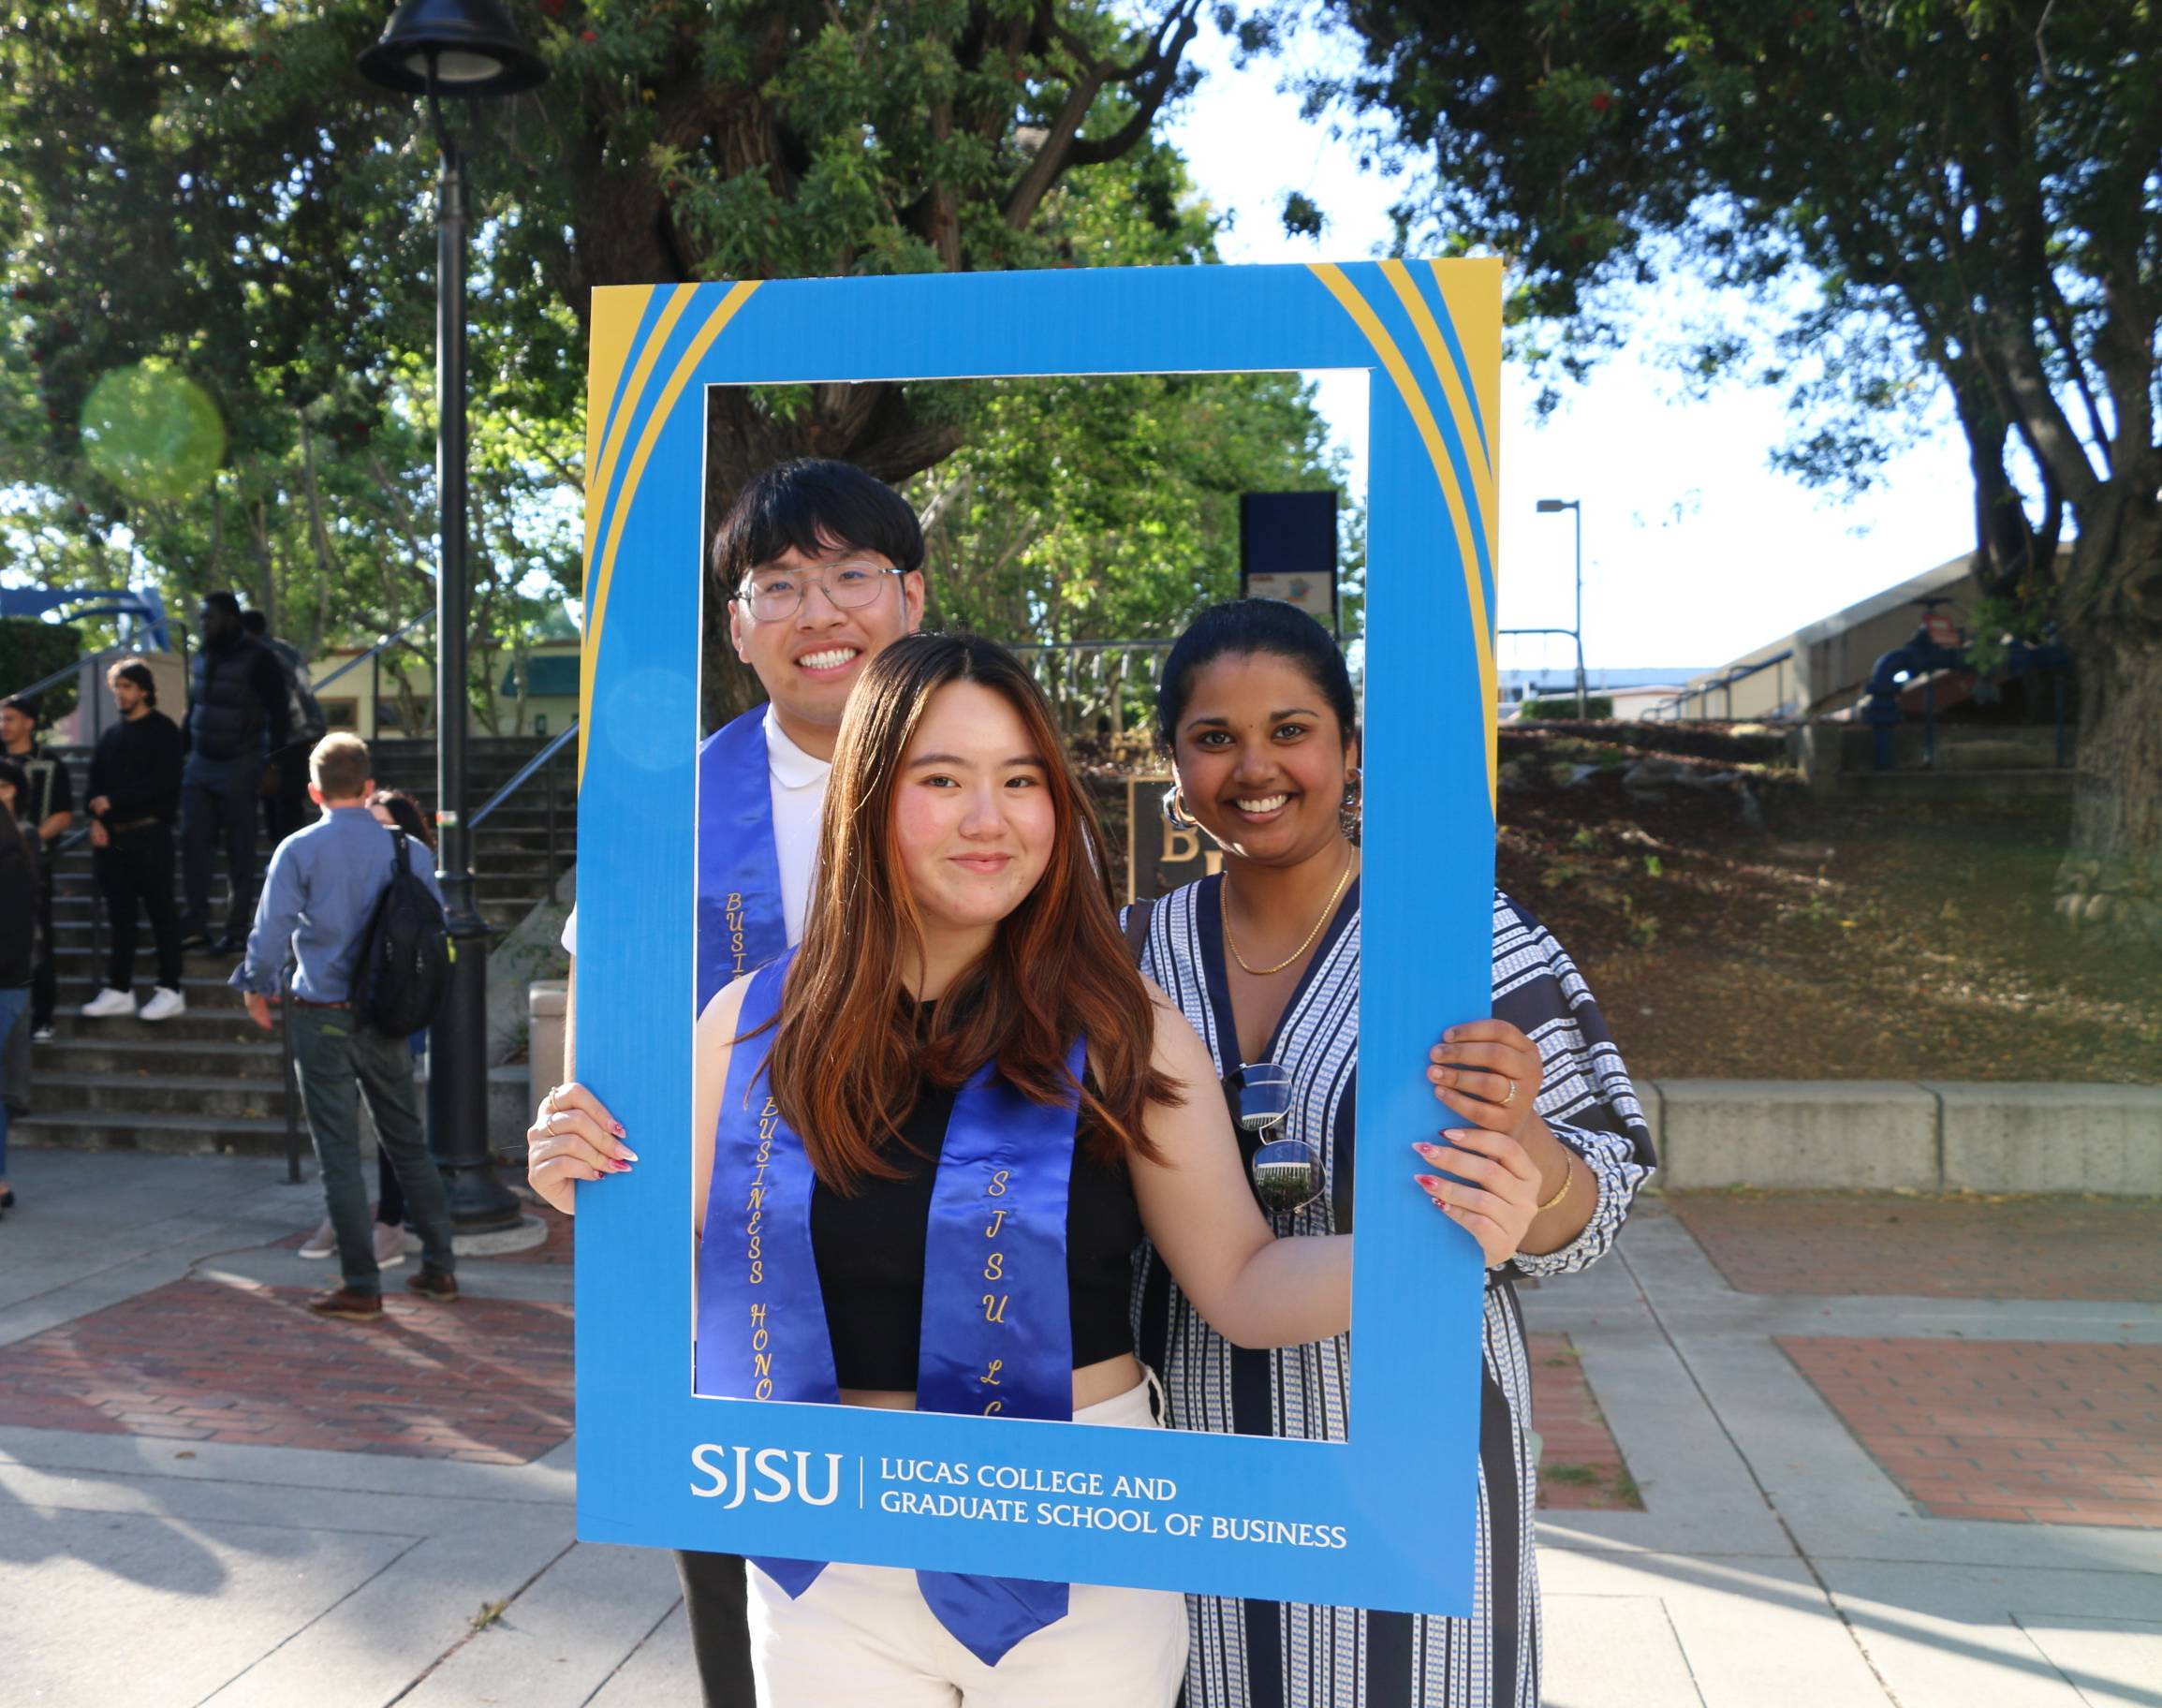 Students pose with a blue and gold LCoB frame